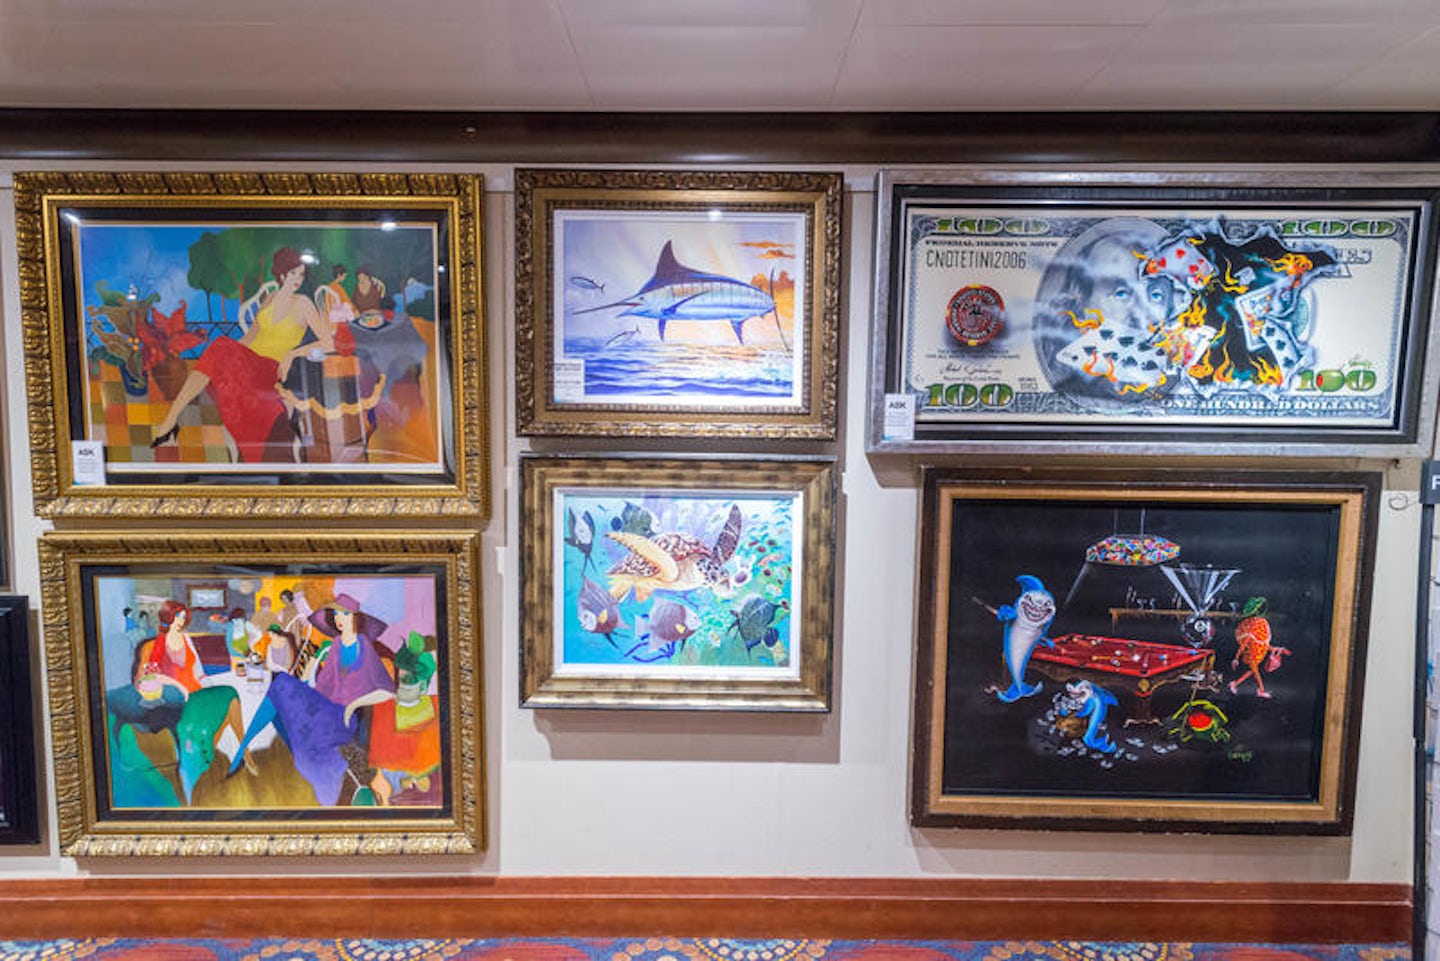 Art Gallery on Carnival Paradise